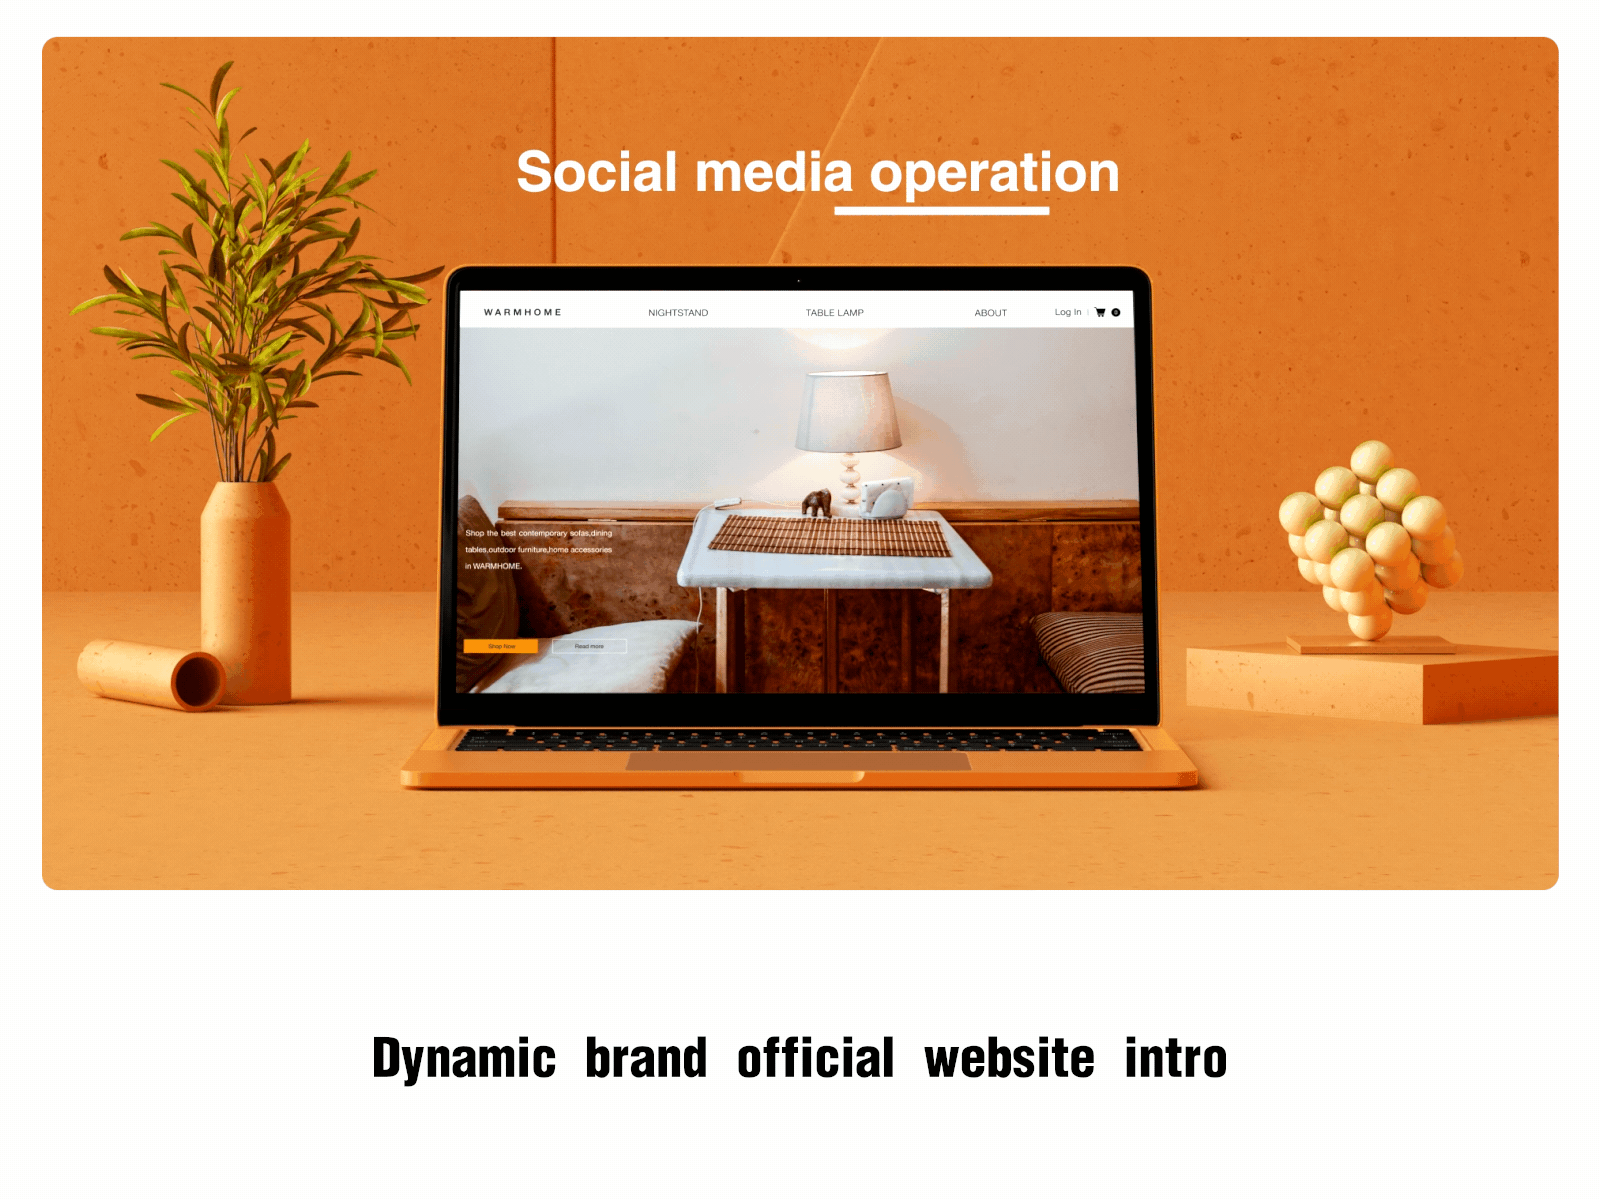 Dynamic brand official website intro